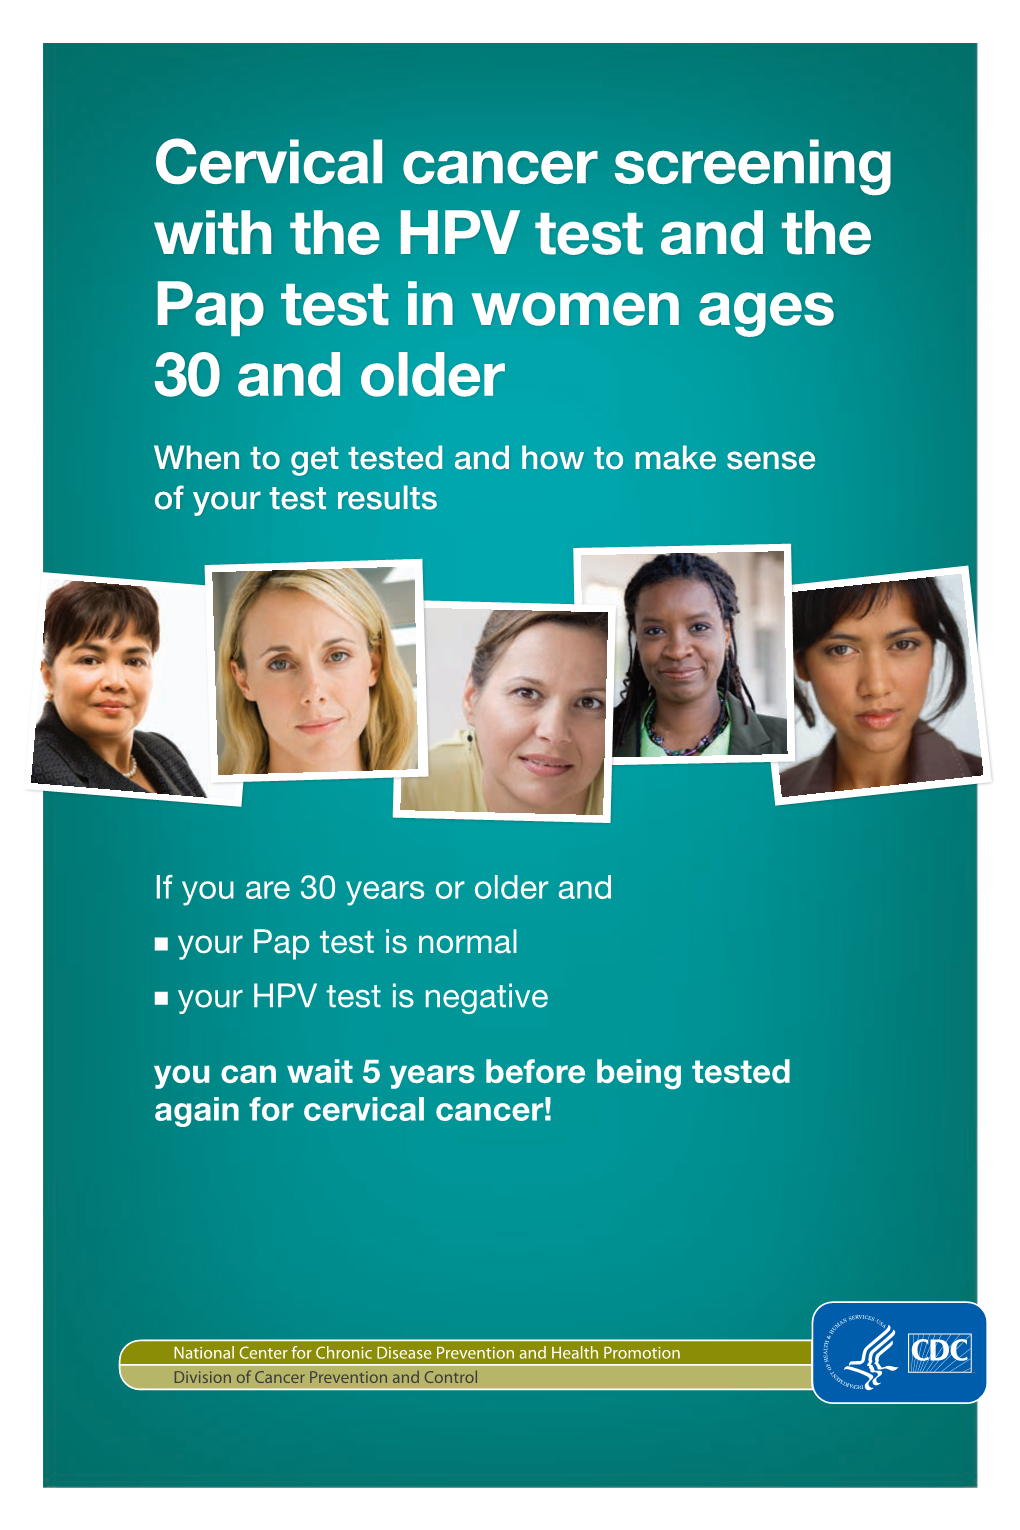 Cervical Cancer Screening with the HPV Test and the Pap Test in Women Ages 30 and Older